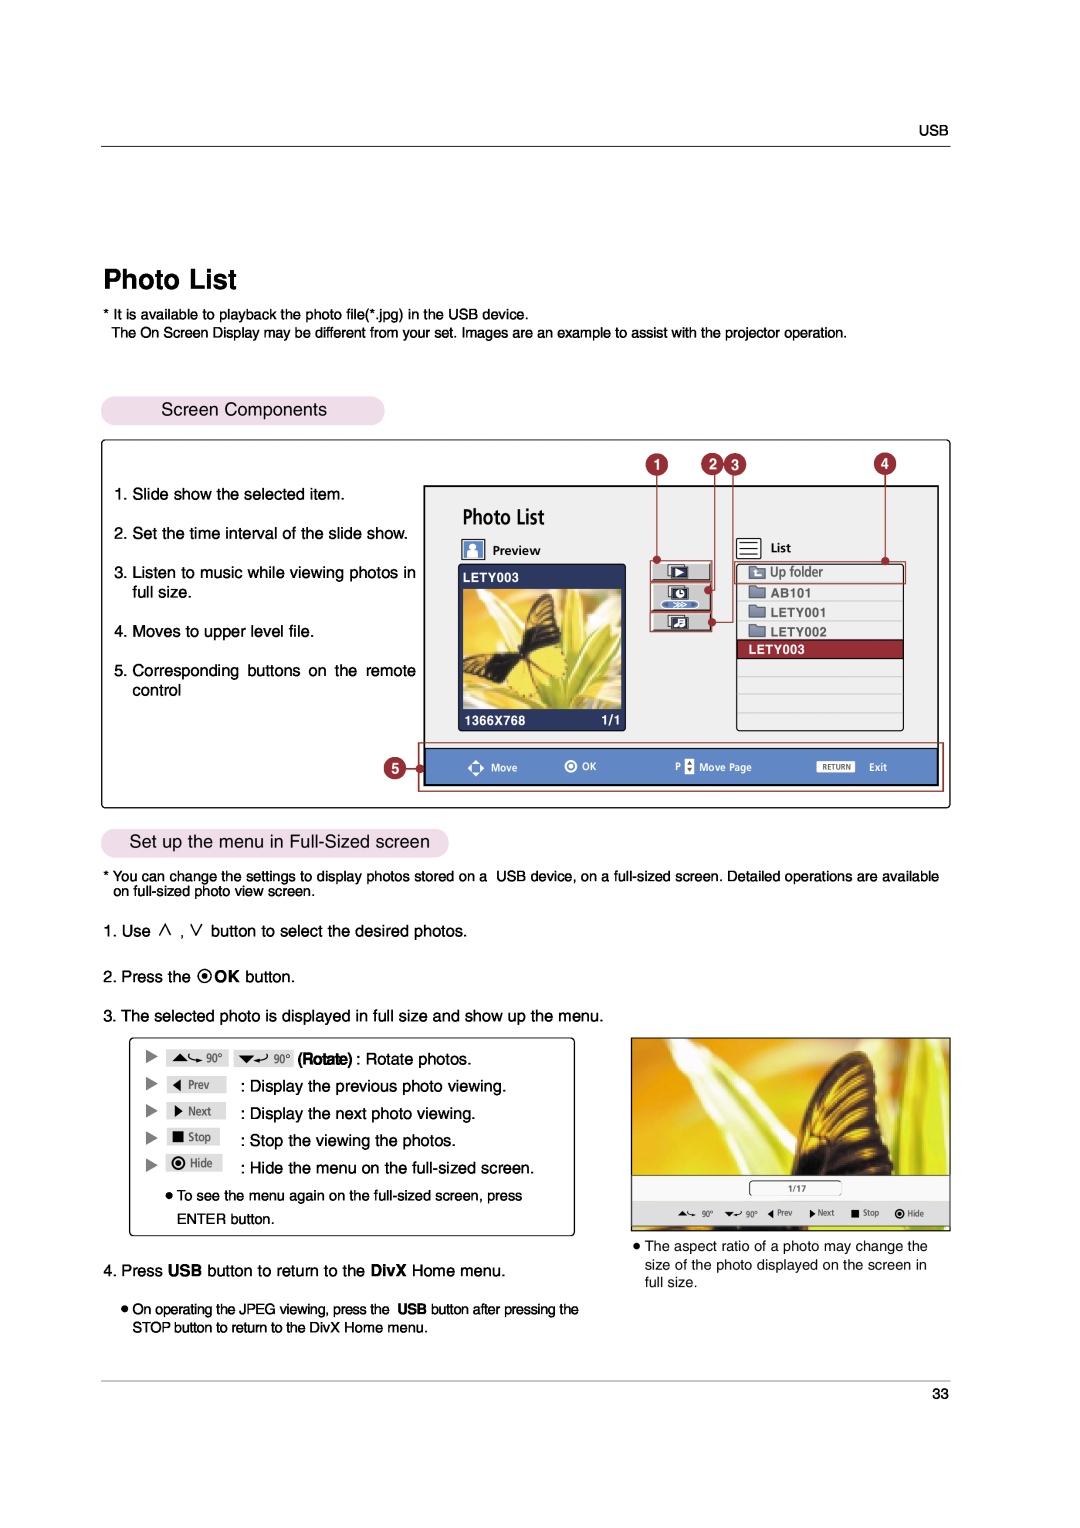 LG Electronics HS102 Photo List, Screen Components, Set up the menu in Full-Sized screen, Slide show the selected item 